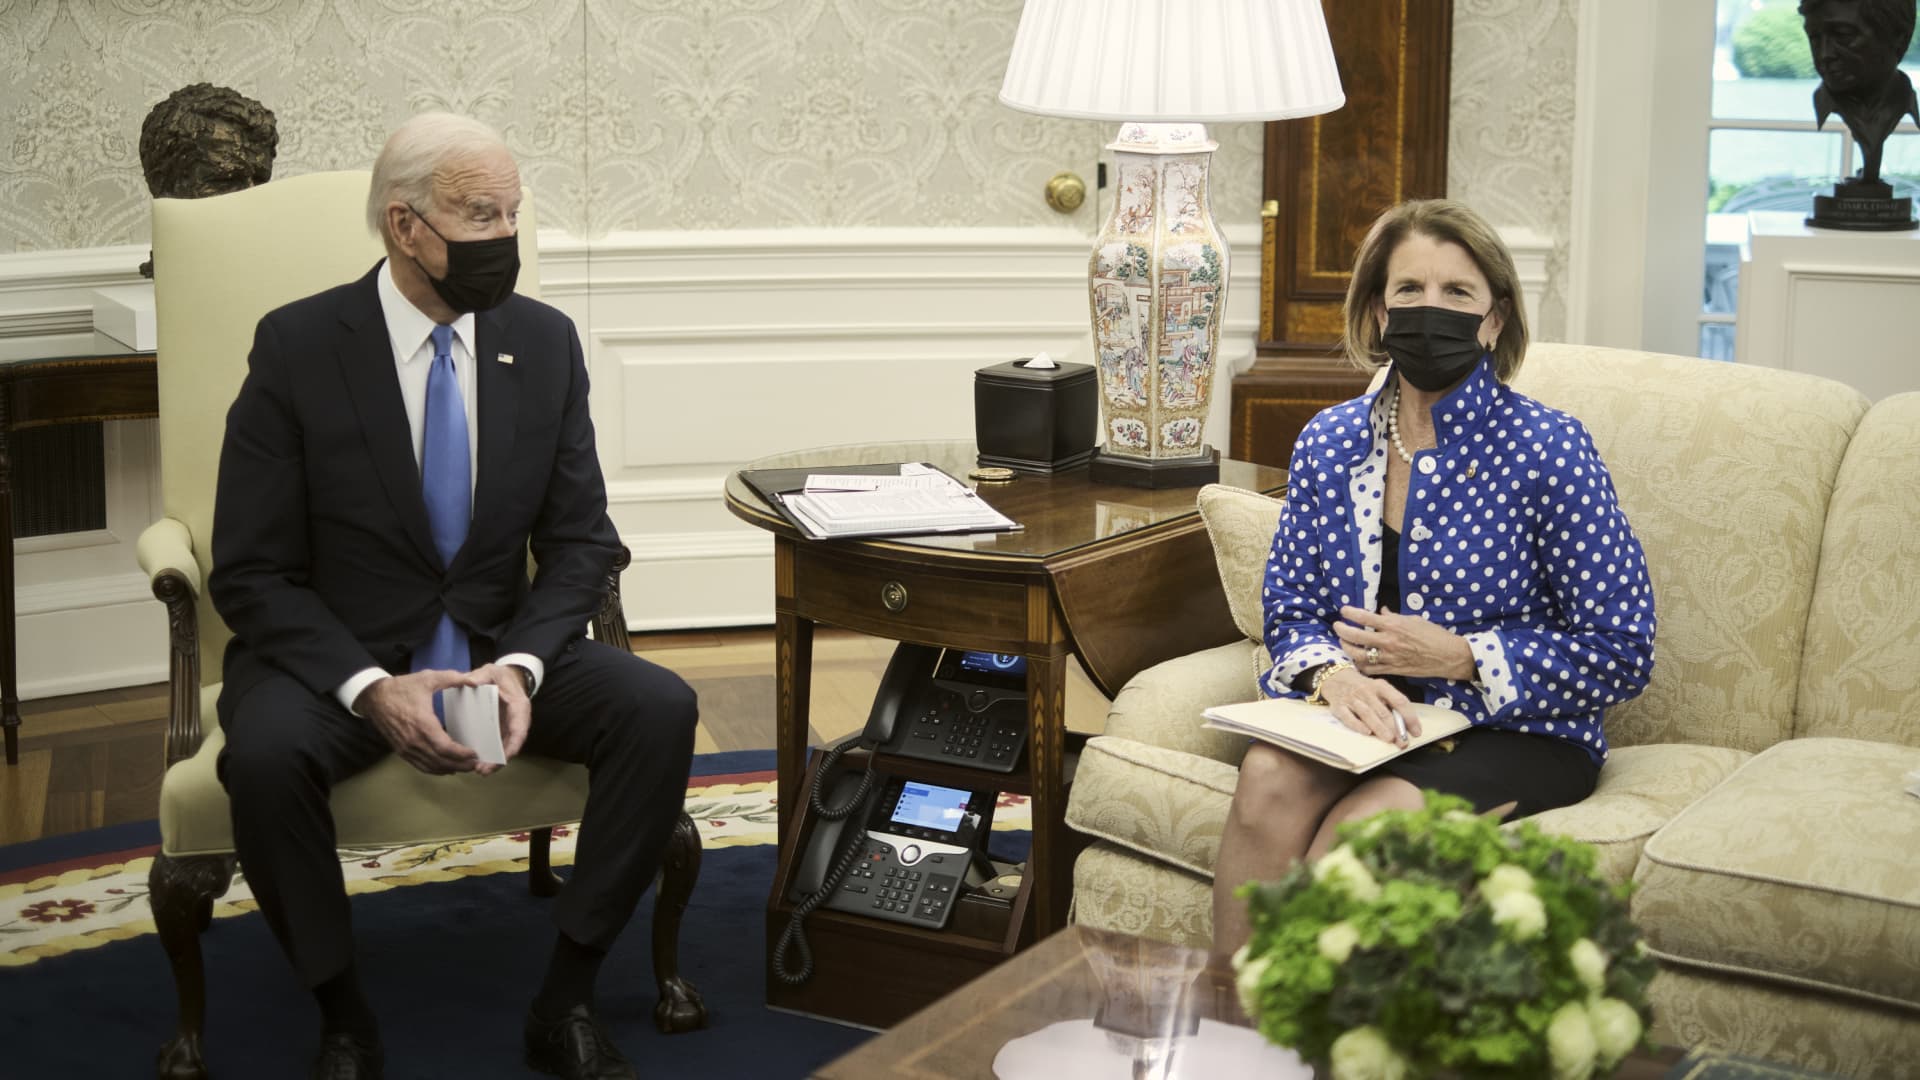 U.S. President Joe Biden, left, wears a protective mask while speaking during a meeting with Senator Shelley Moore Capito, a Republican from West Virginia, in the Oval Office of the White House in Washington, D.C., U.S., on Thursday, May 13, 2021.